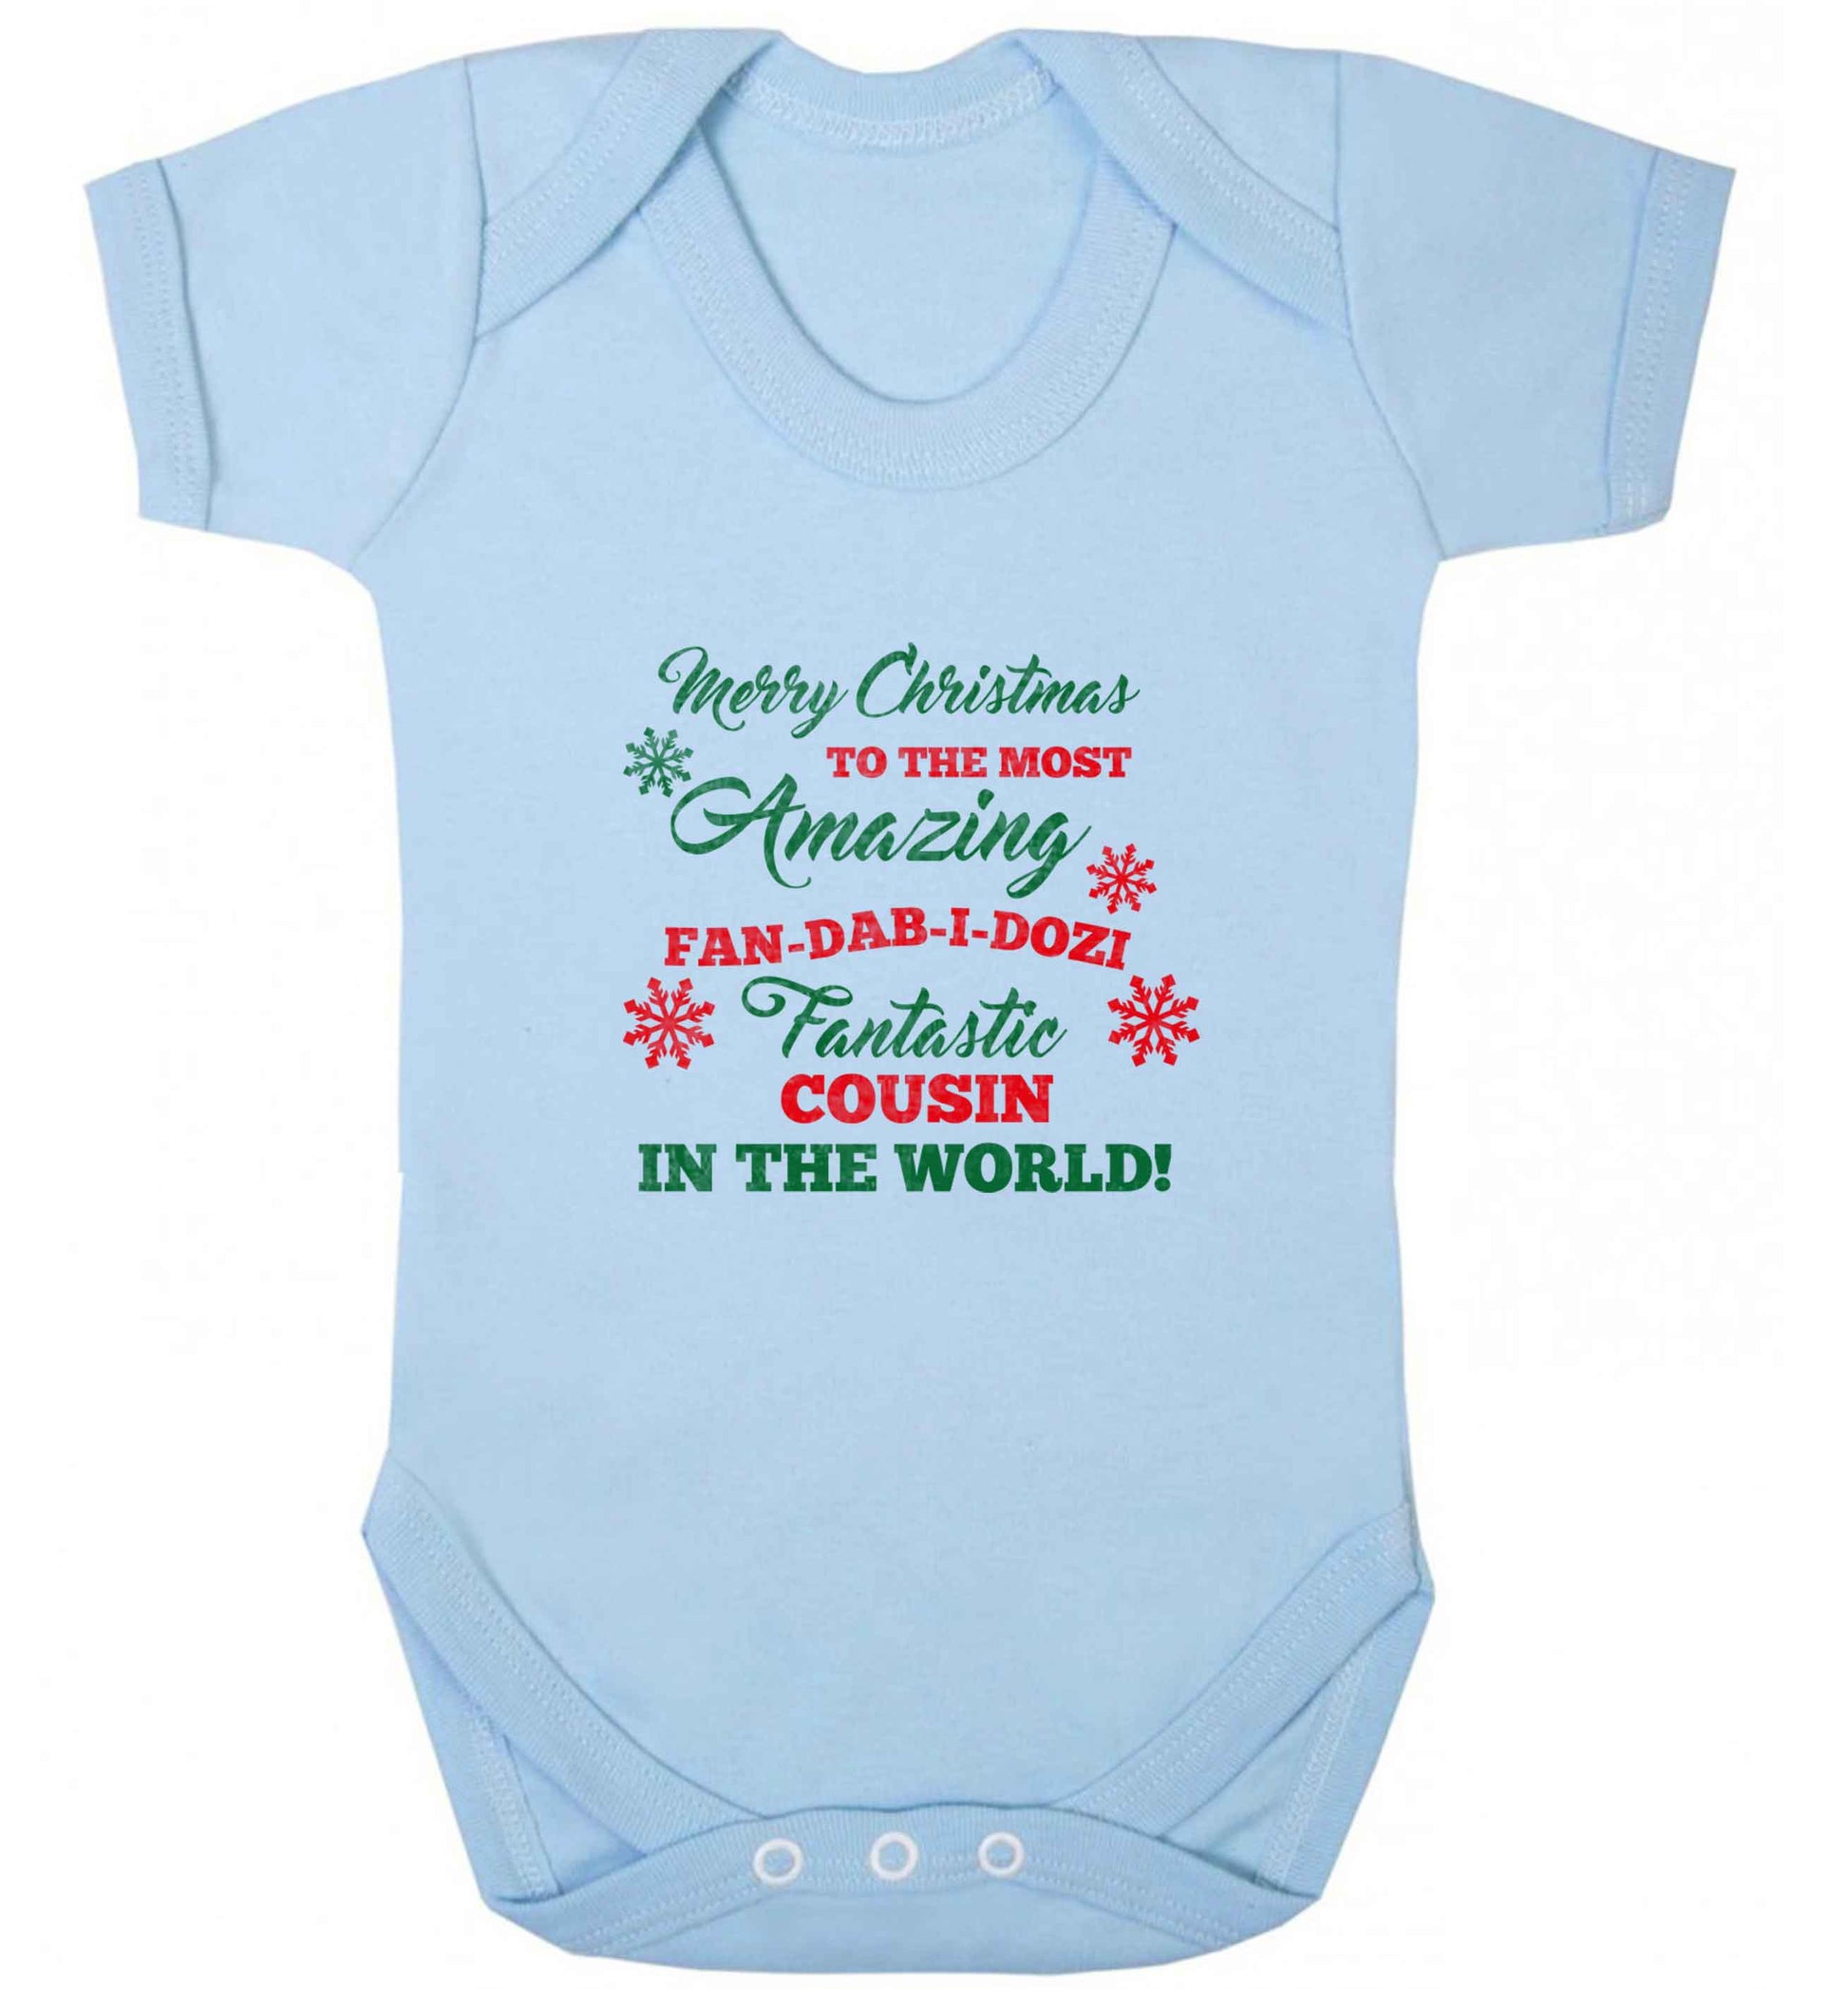 Merry Christmas to the most amazing fan-dab-i-dozi fantasic Cousin in the world baby vest pale blue 18-24 months